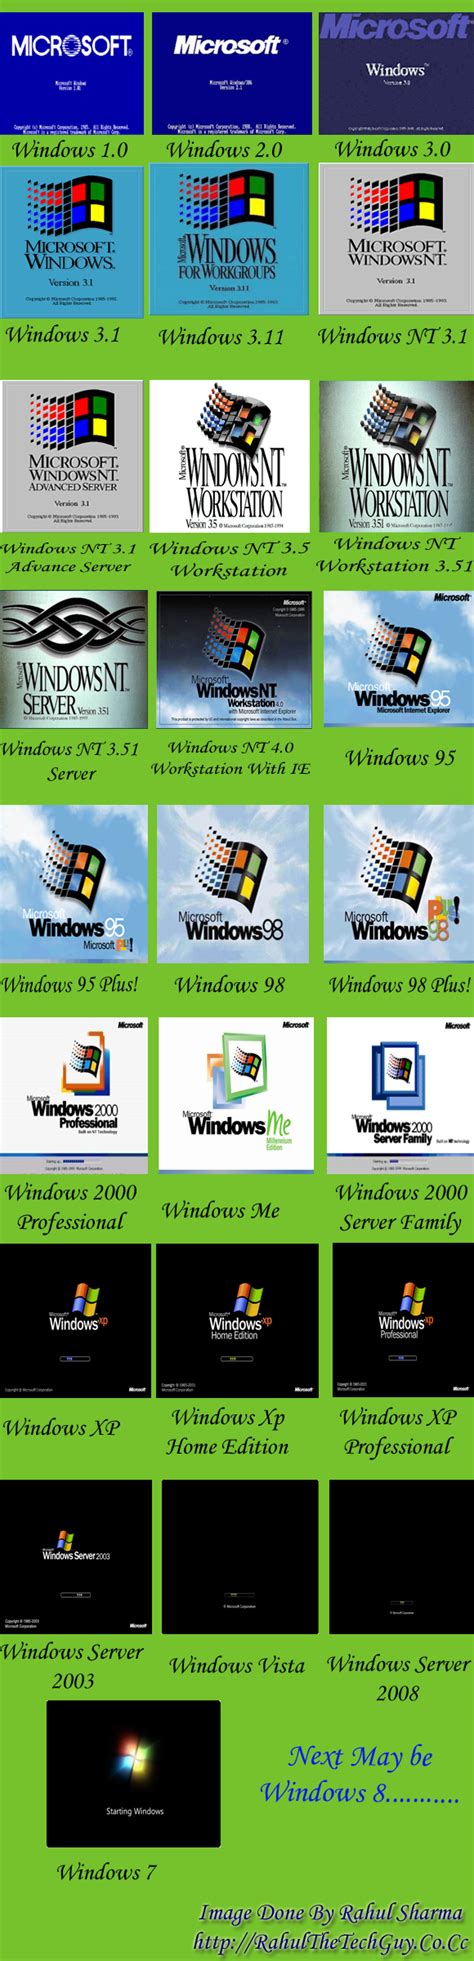 Windows Boot Screen Collection Boot Screen Of Windows 10 To Windows 7